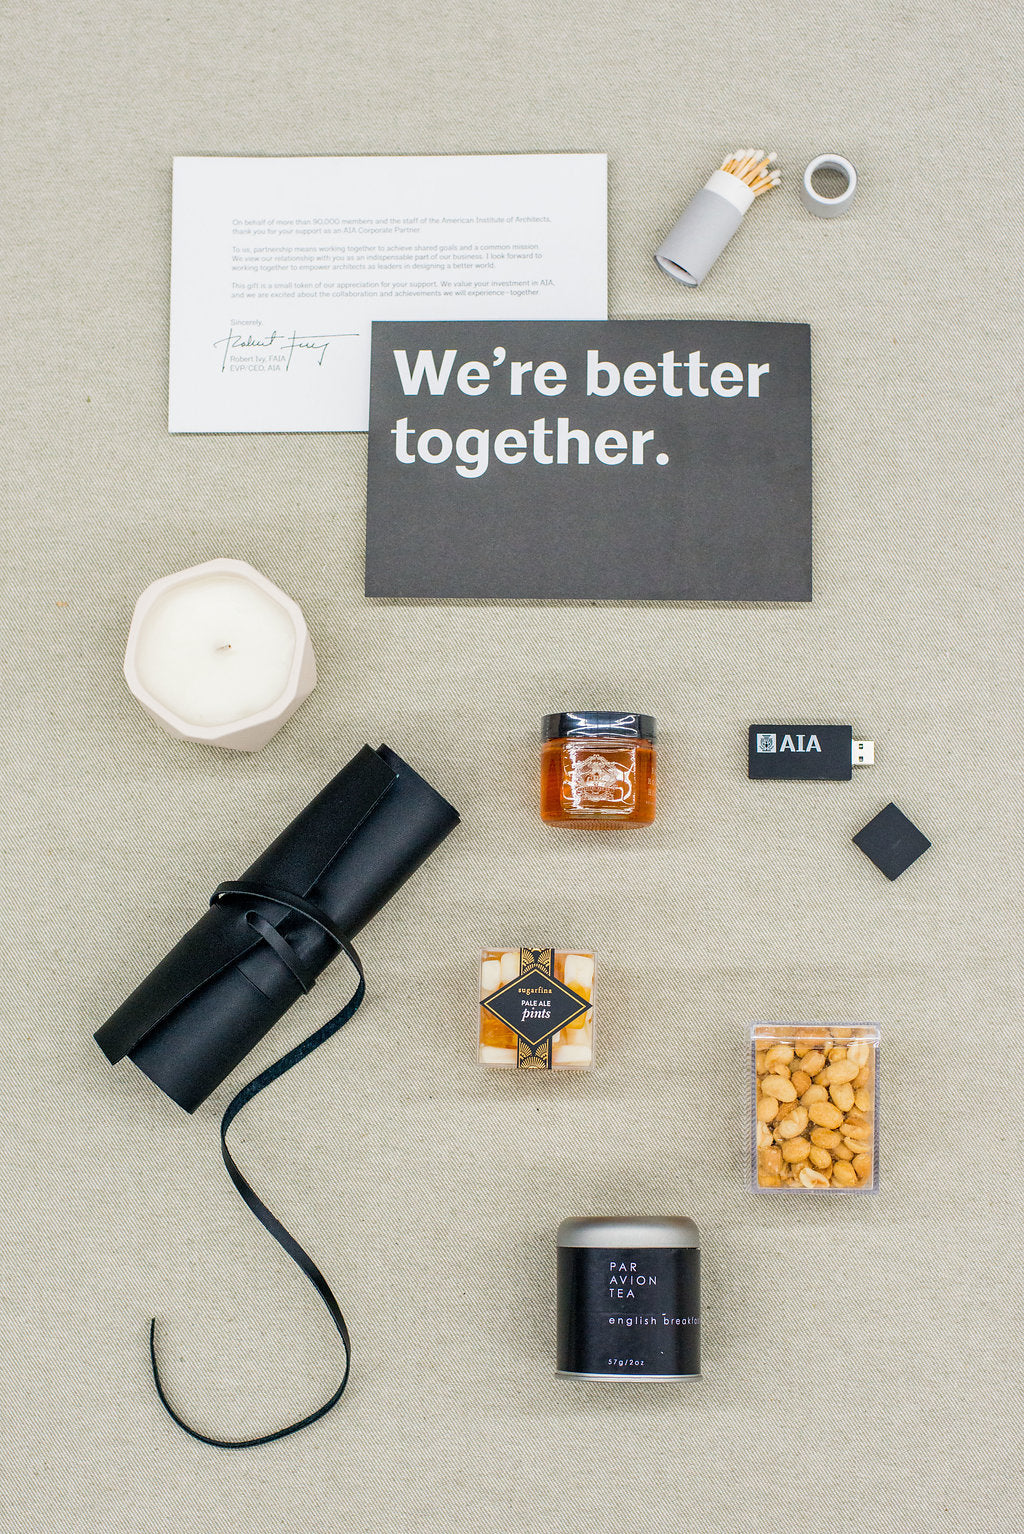 Case Study: Modern “Better Together” Themed Client Gifts